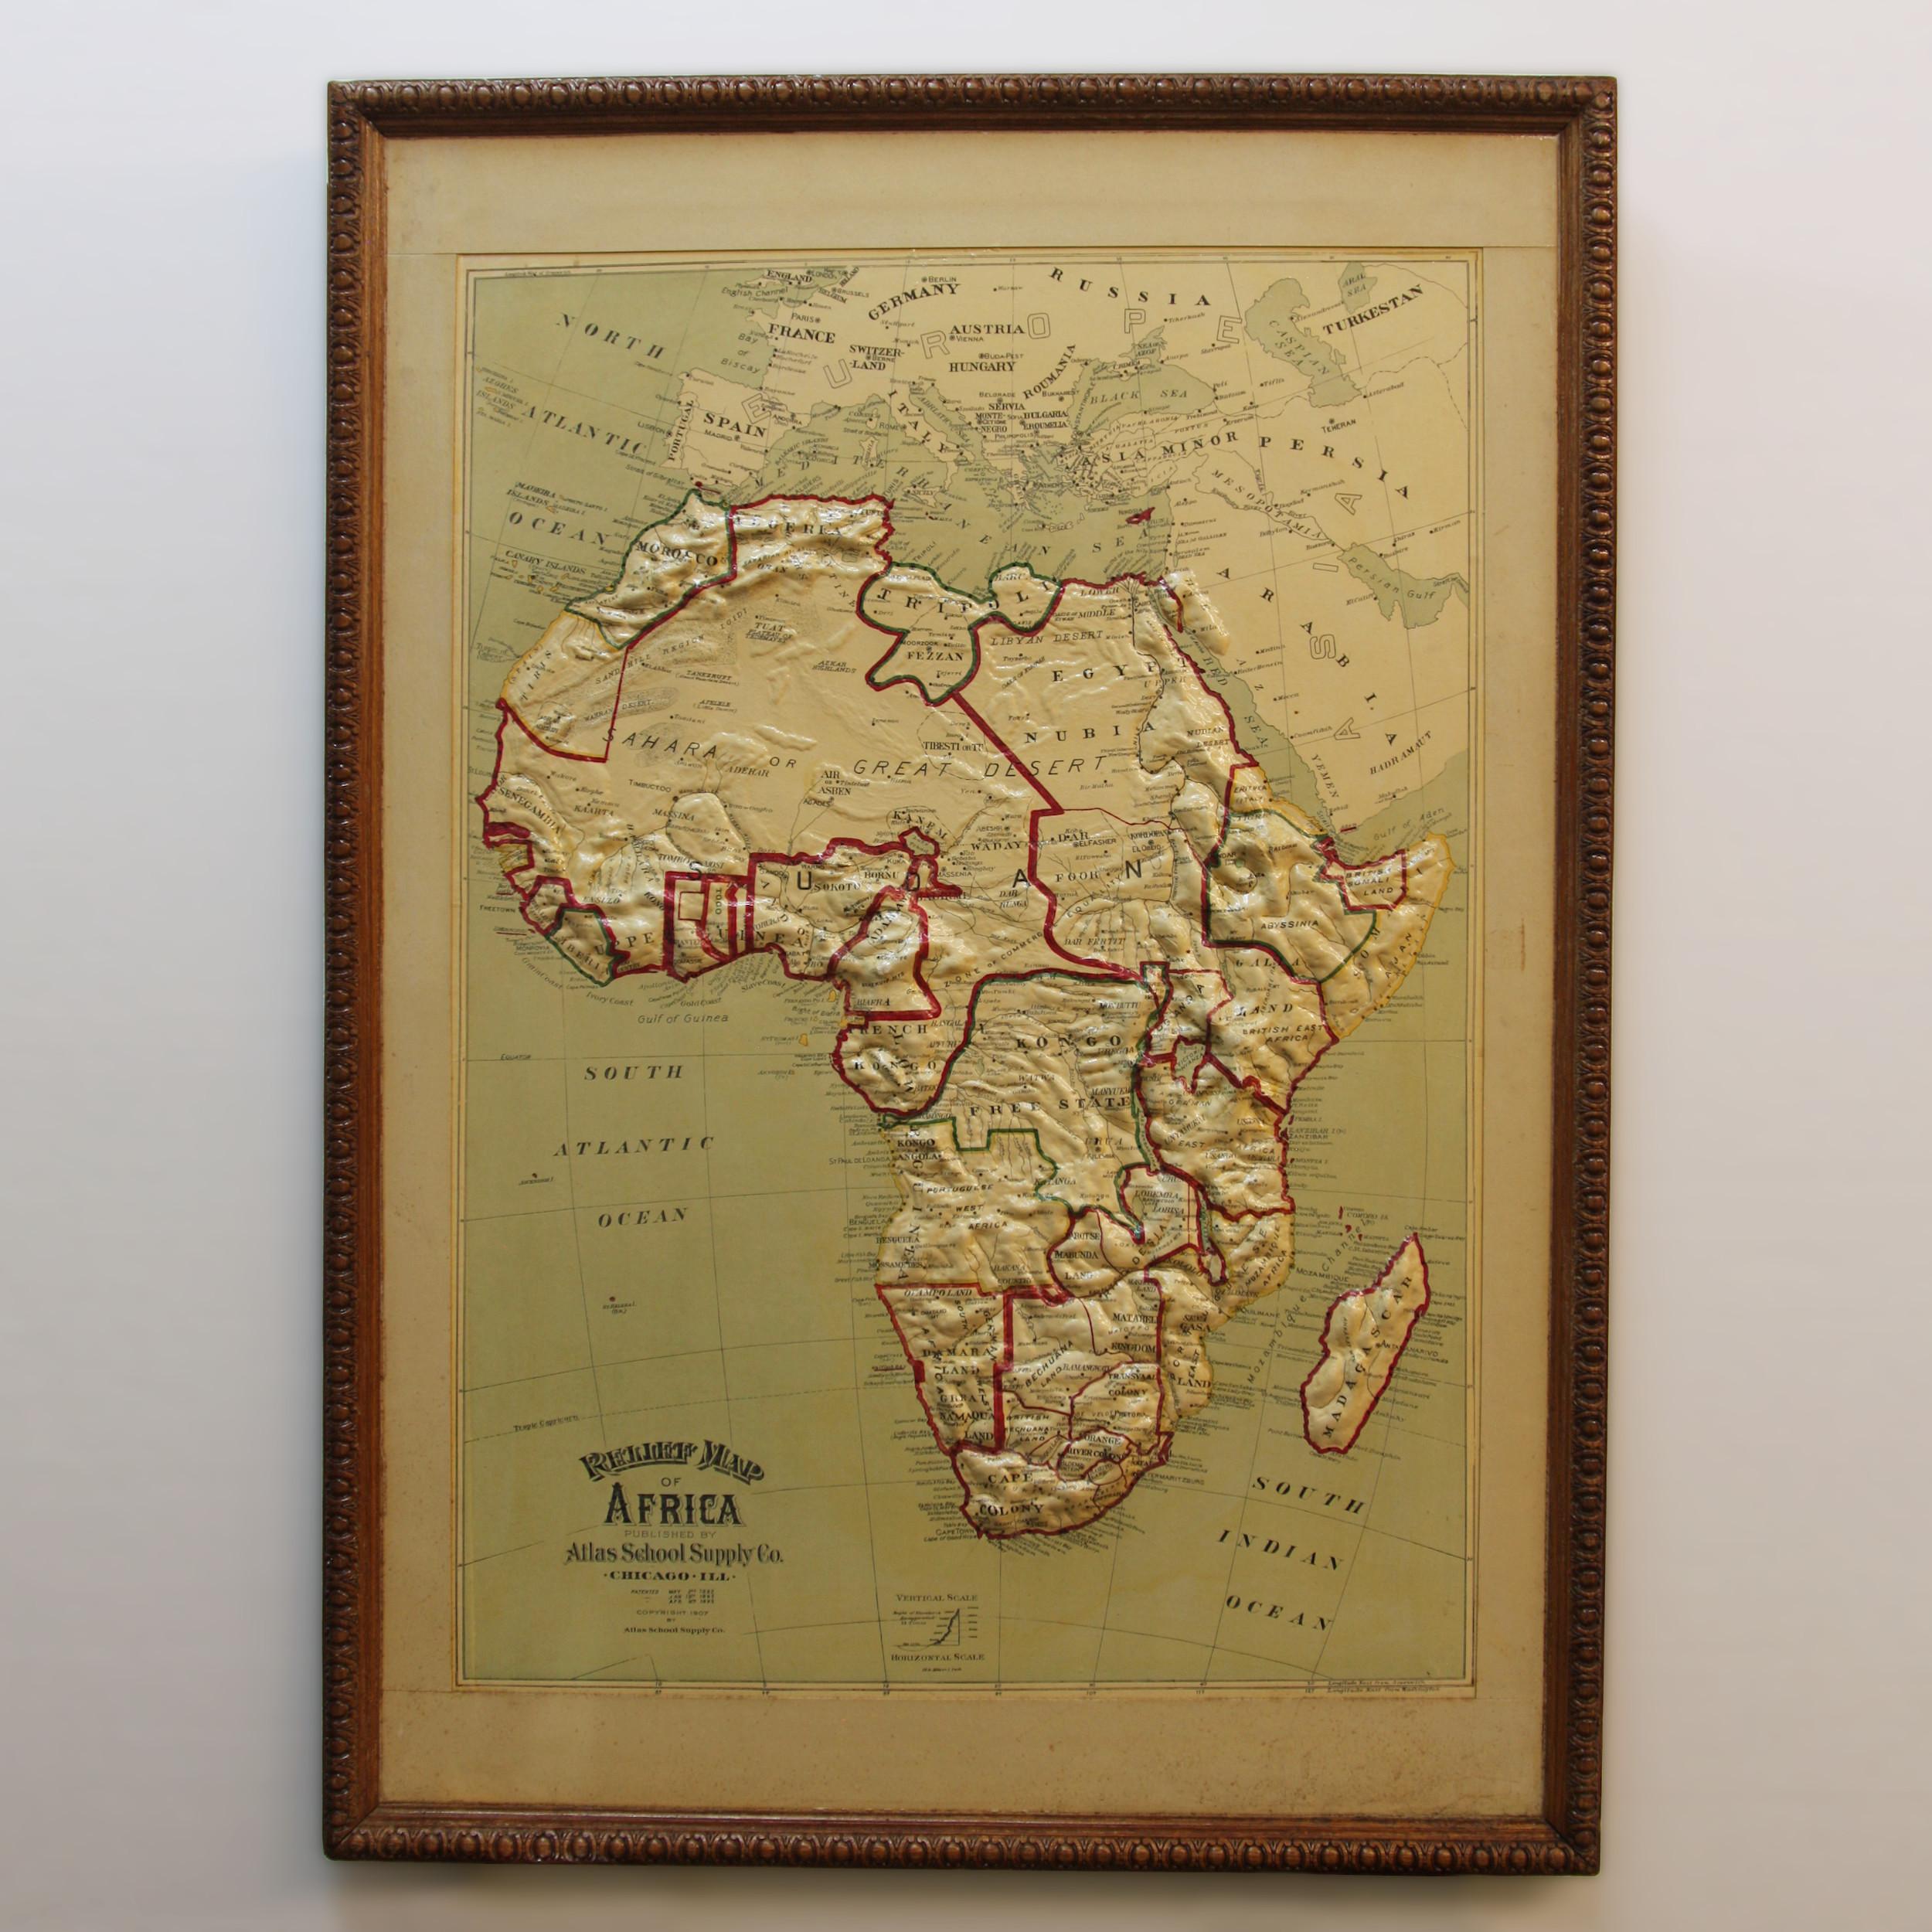 Remarkably original, 1907 Relief map of Africa by the Atlas School Supply Co. of Chicago, Illinois. This exceptional quality map features its original oak frame, heavy-duty stretcher, bold graphics and beautifully molded 3-D papier-mâché topography.